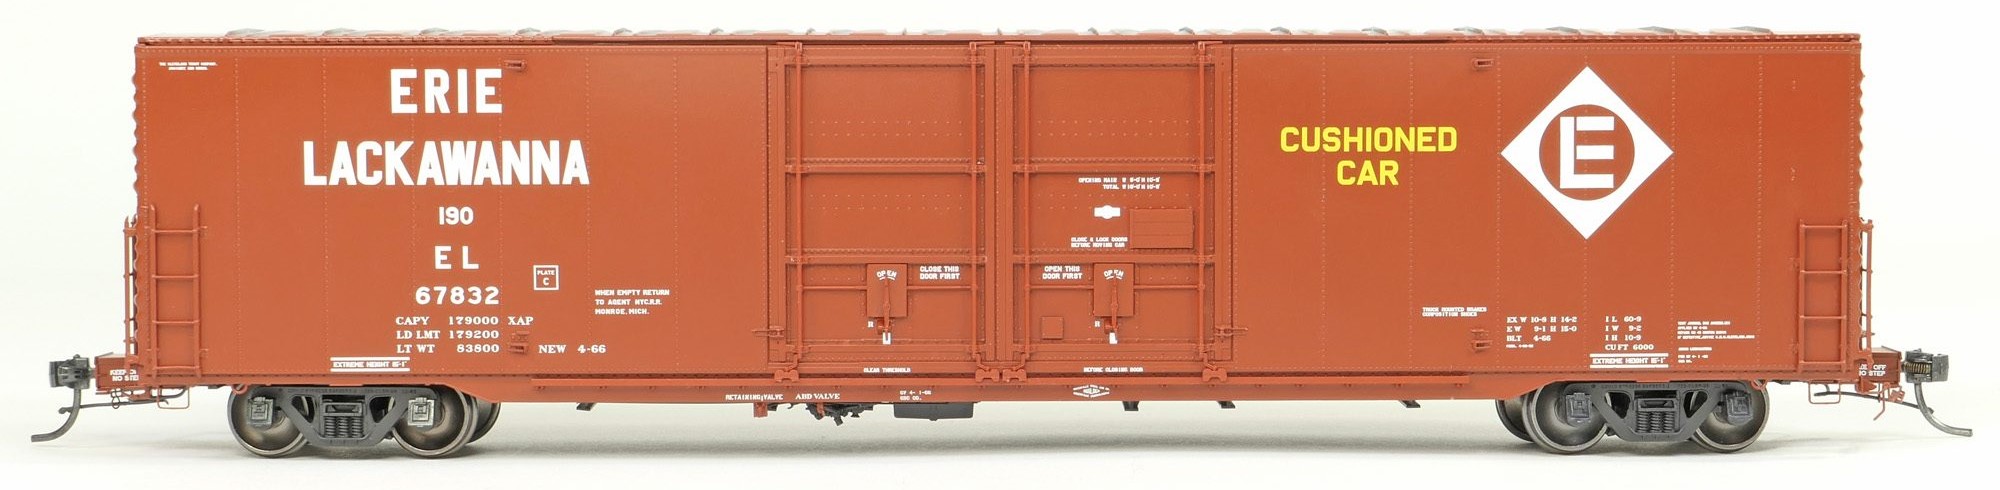 Tangent Scale Models HO 33012-01 Greenville 6,000CuFt 60' Double Door Box Car Erie Lackawanna 'Delivery Red 1966' EL #67825